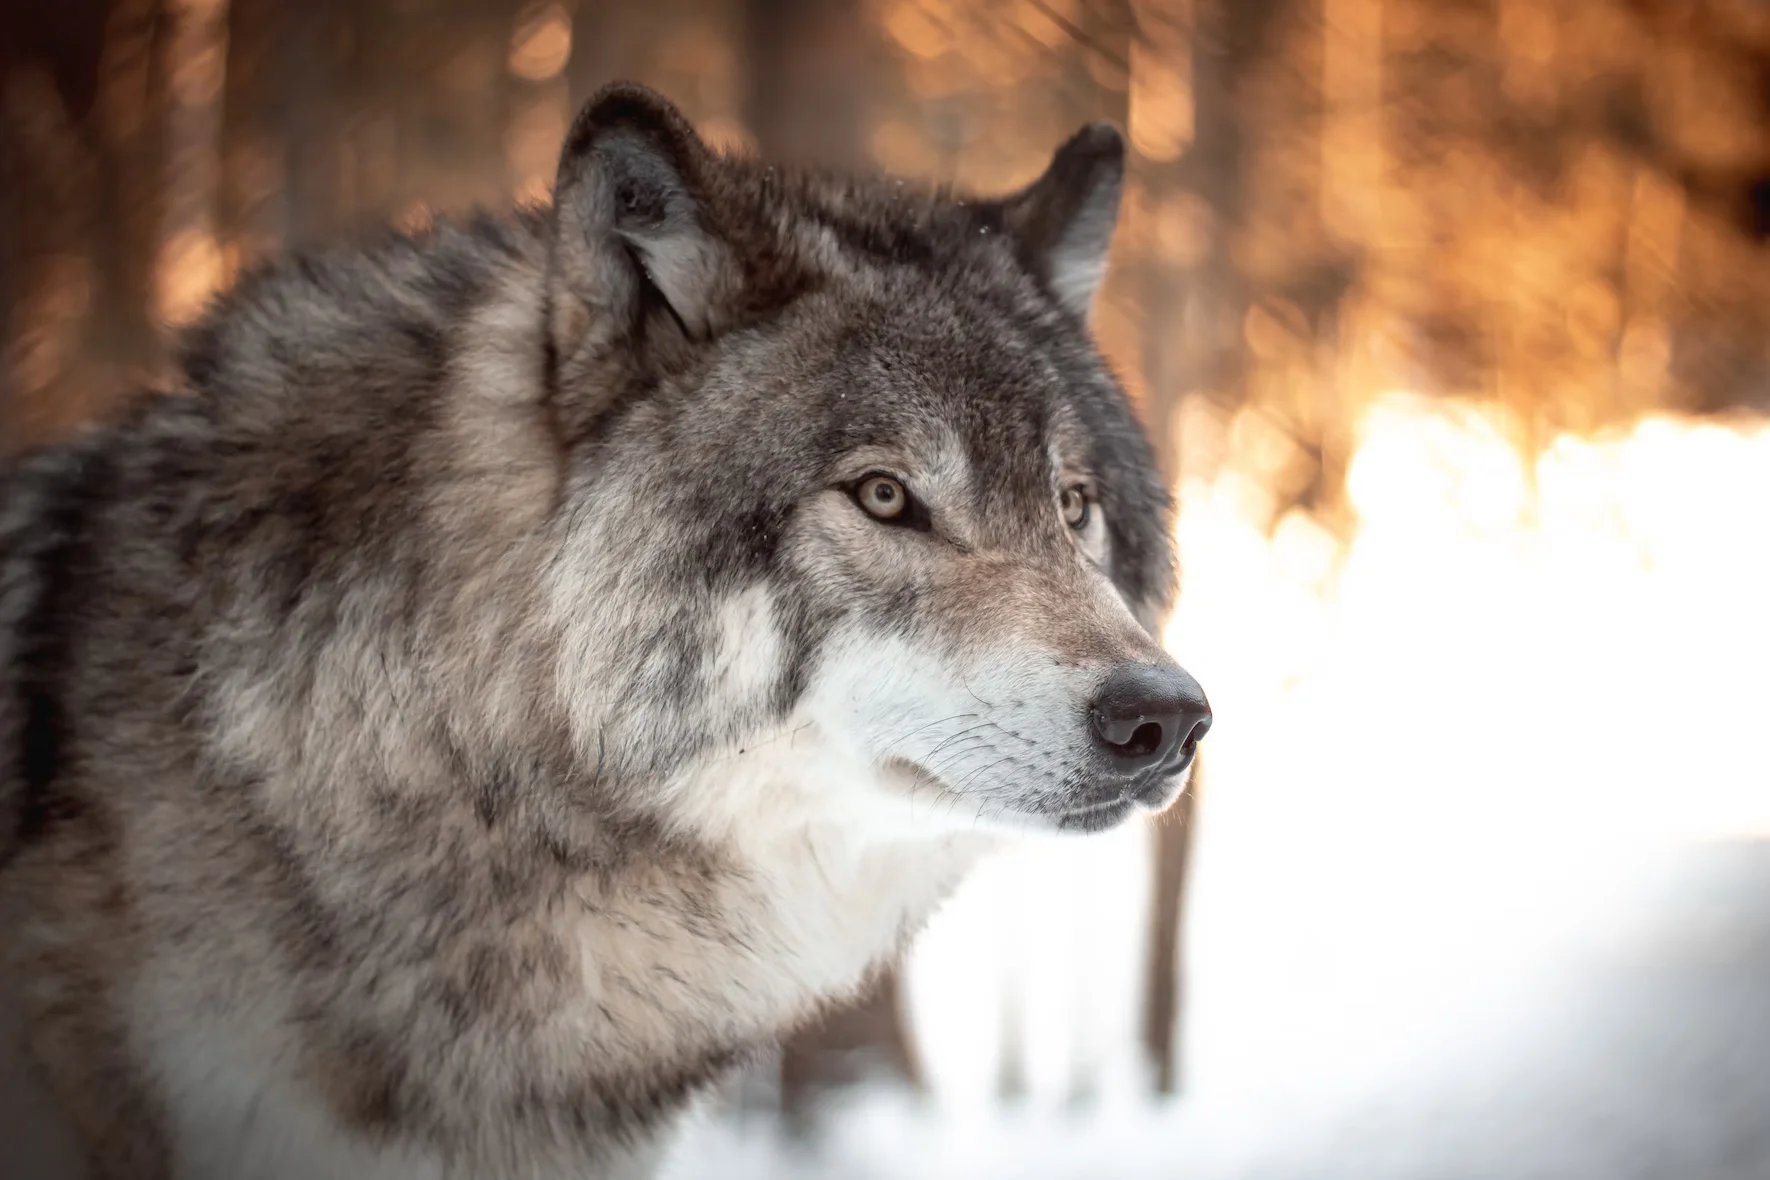 A wolf caught in Montreal, Quebec, Canada. Image by Milo W.